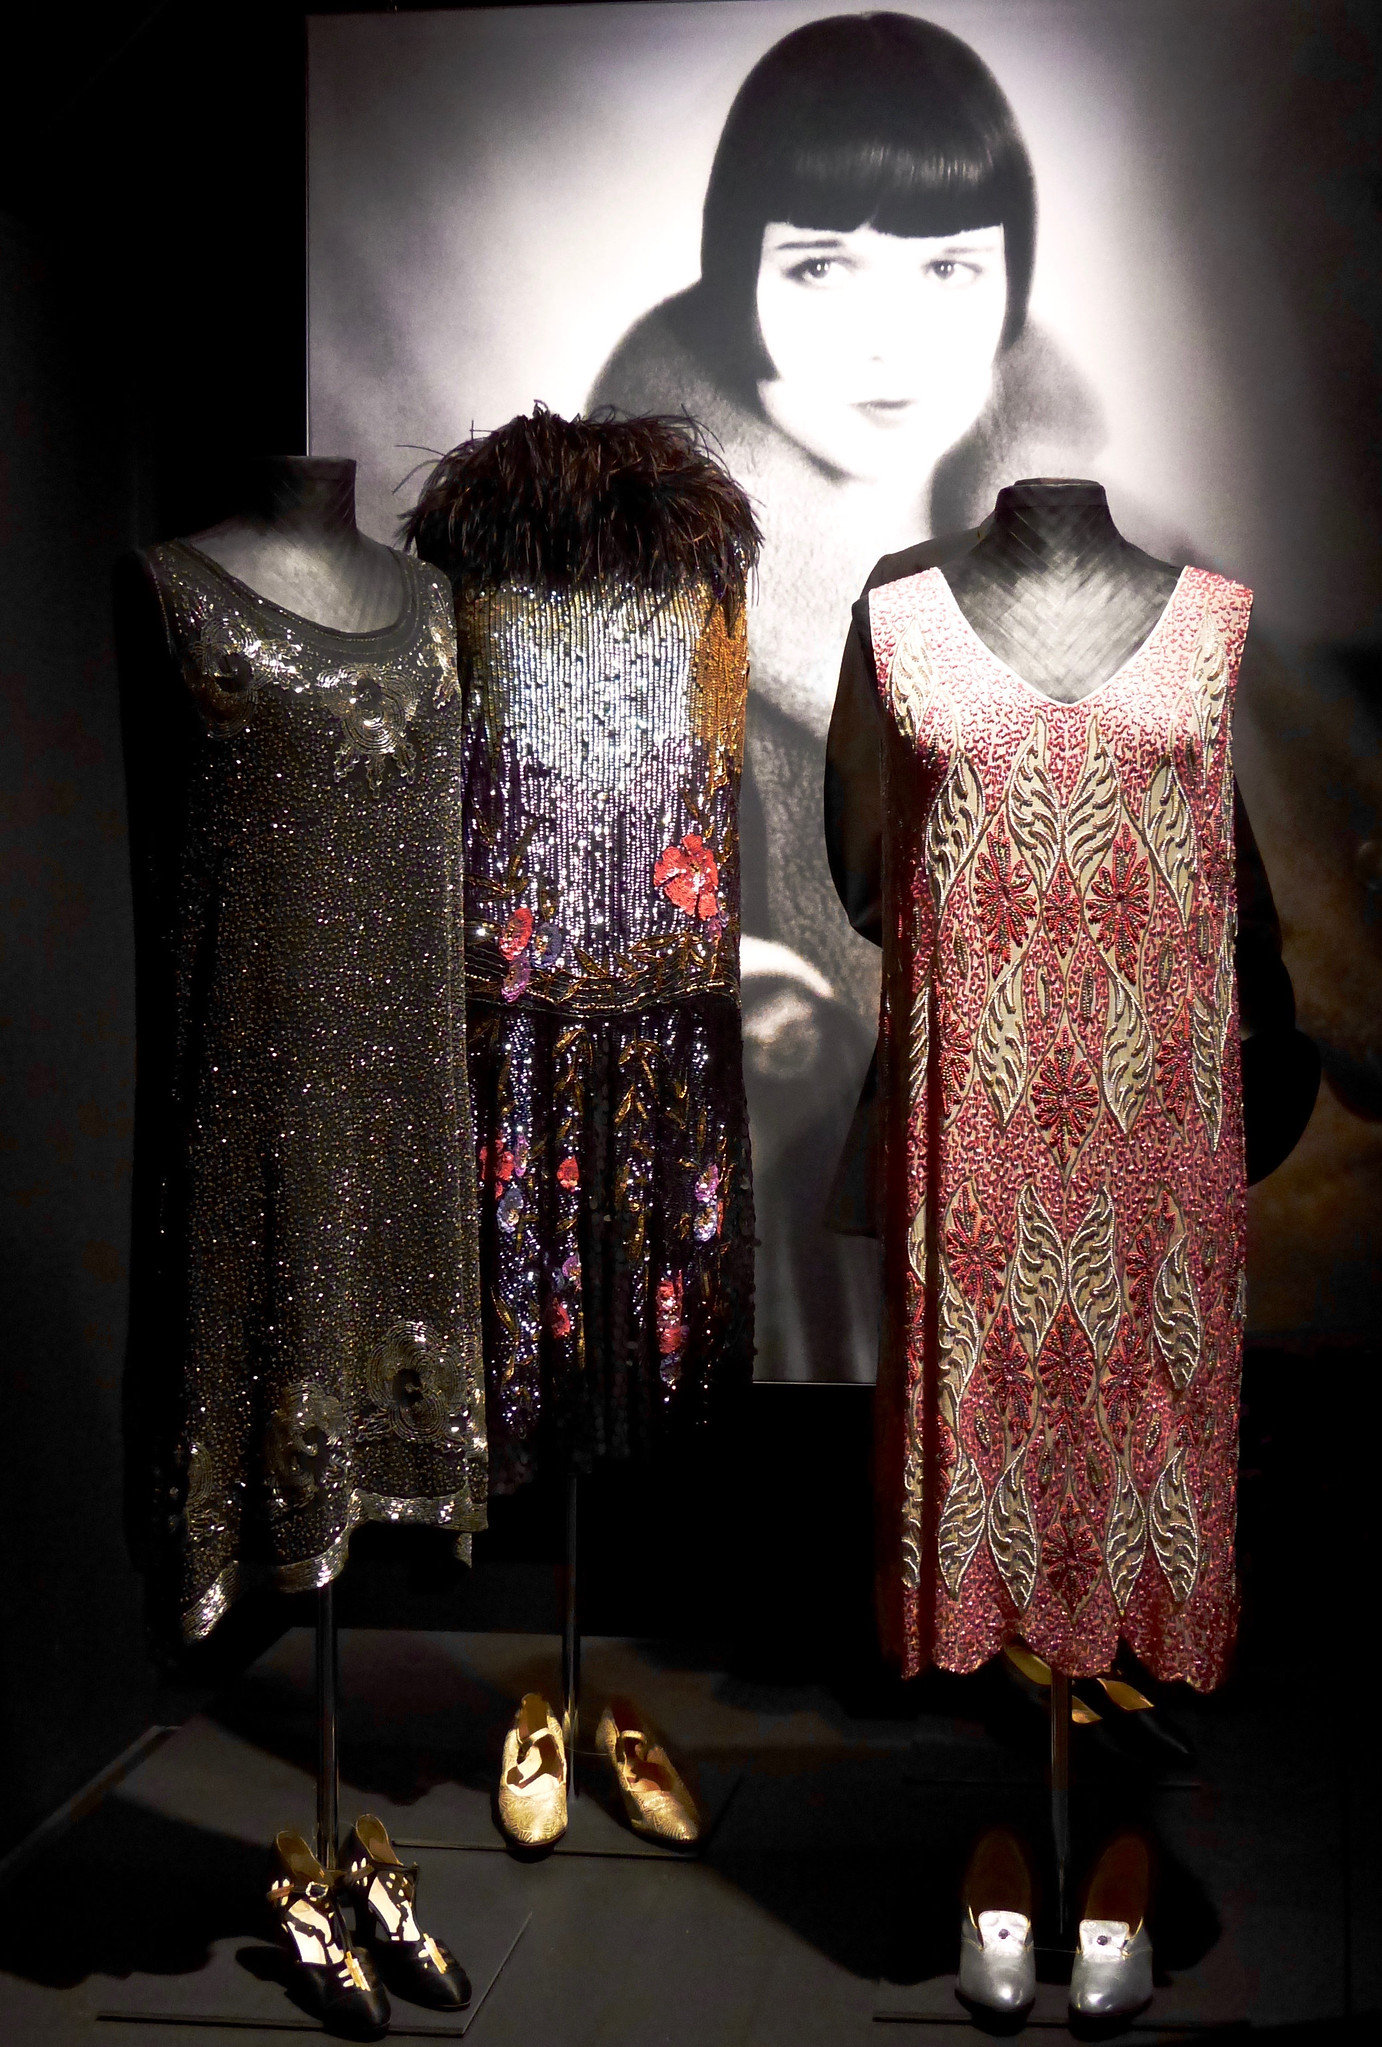 1920s fashion at the Industriemuseum Textilfabrik Cromford in Ratingen, Germany. Credit Geolina163